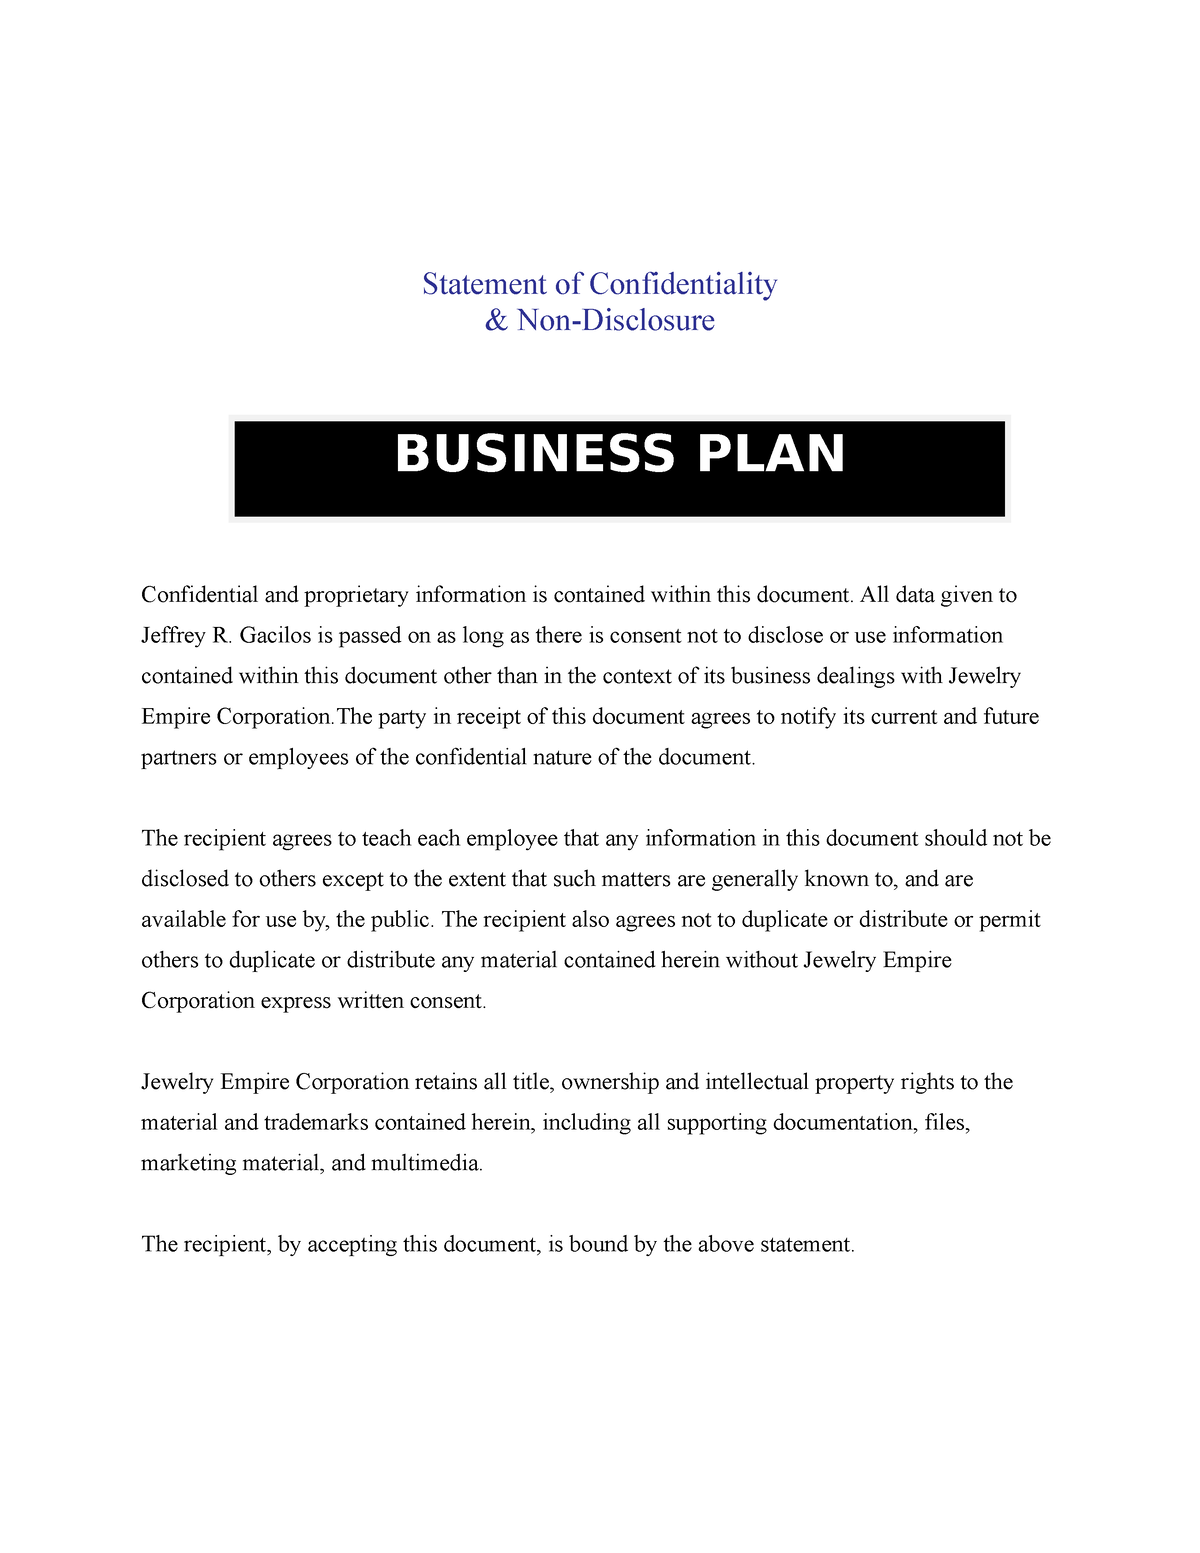 statement of confidentiality of a business plan